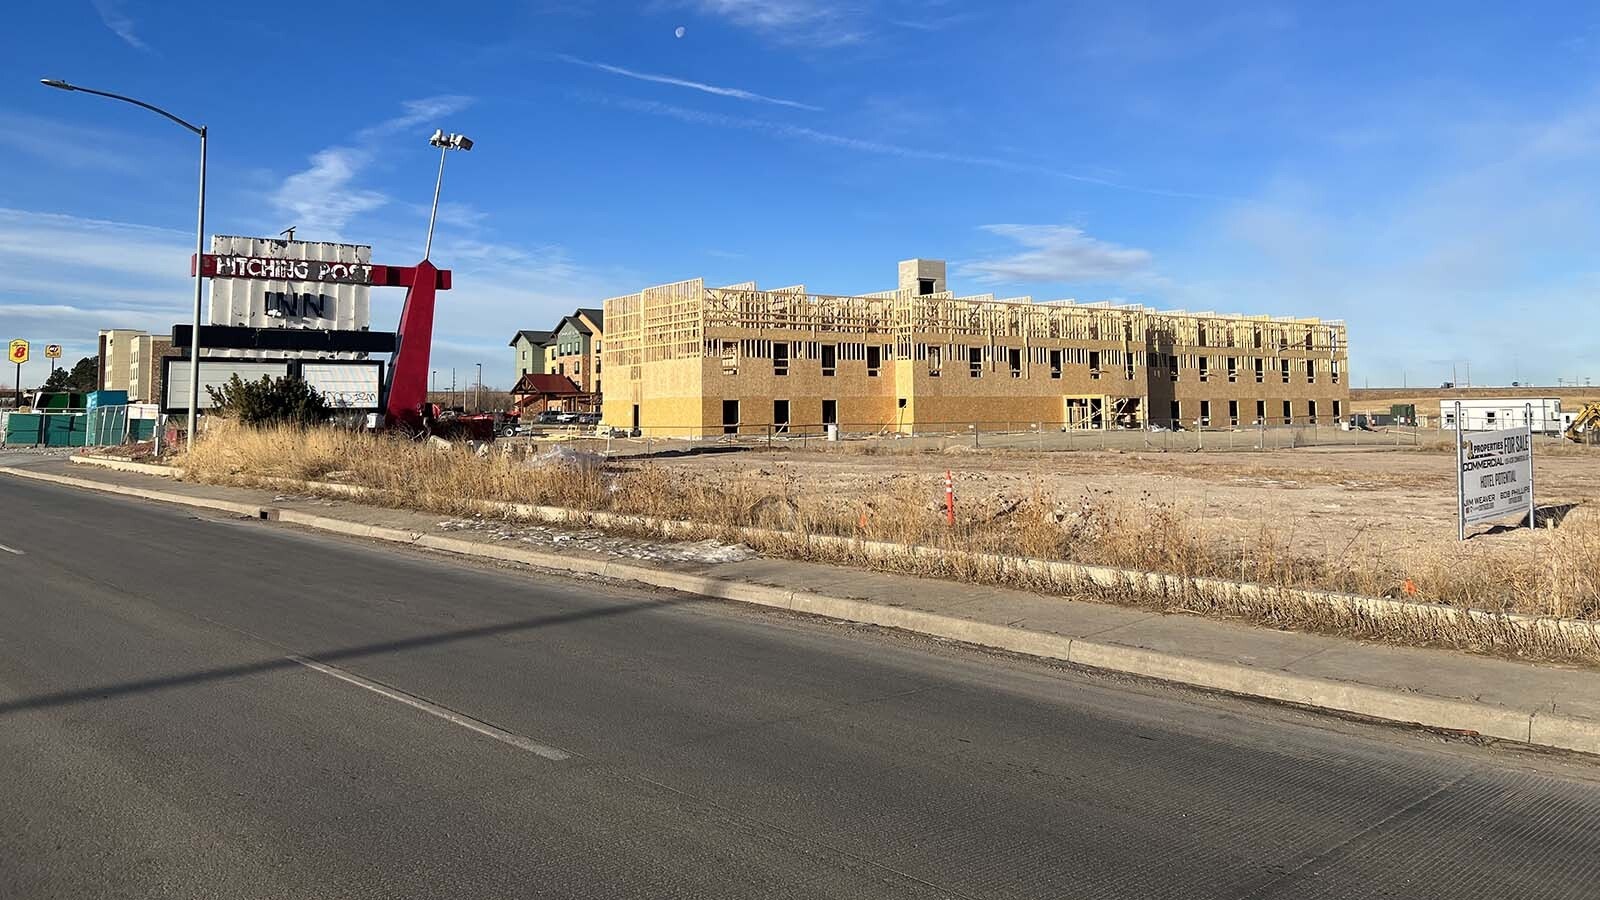 Work is progressing on one of two new hotels on the site of the historic Hitching Post Inn in Cheyenne.